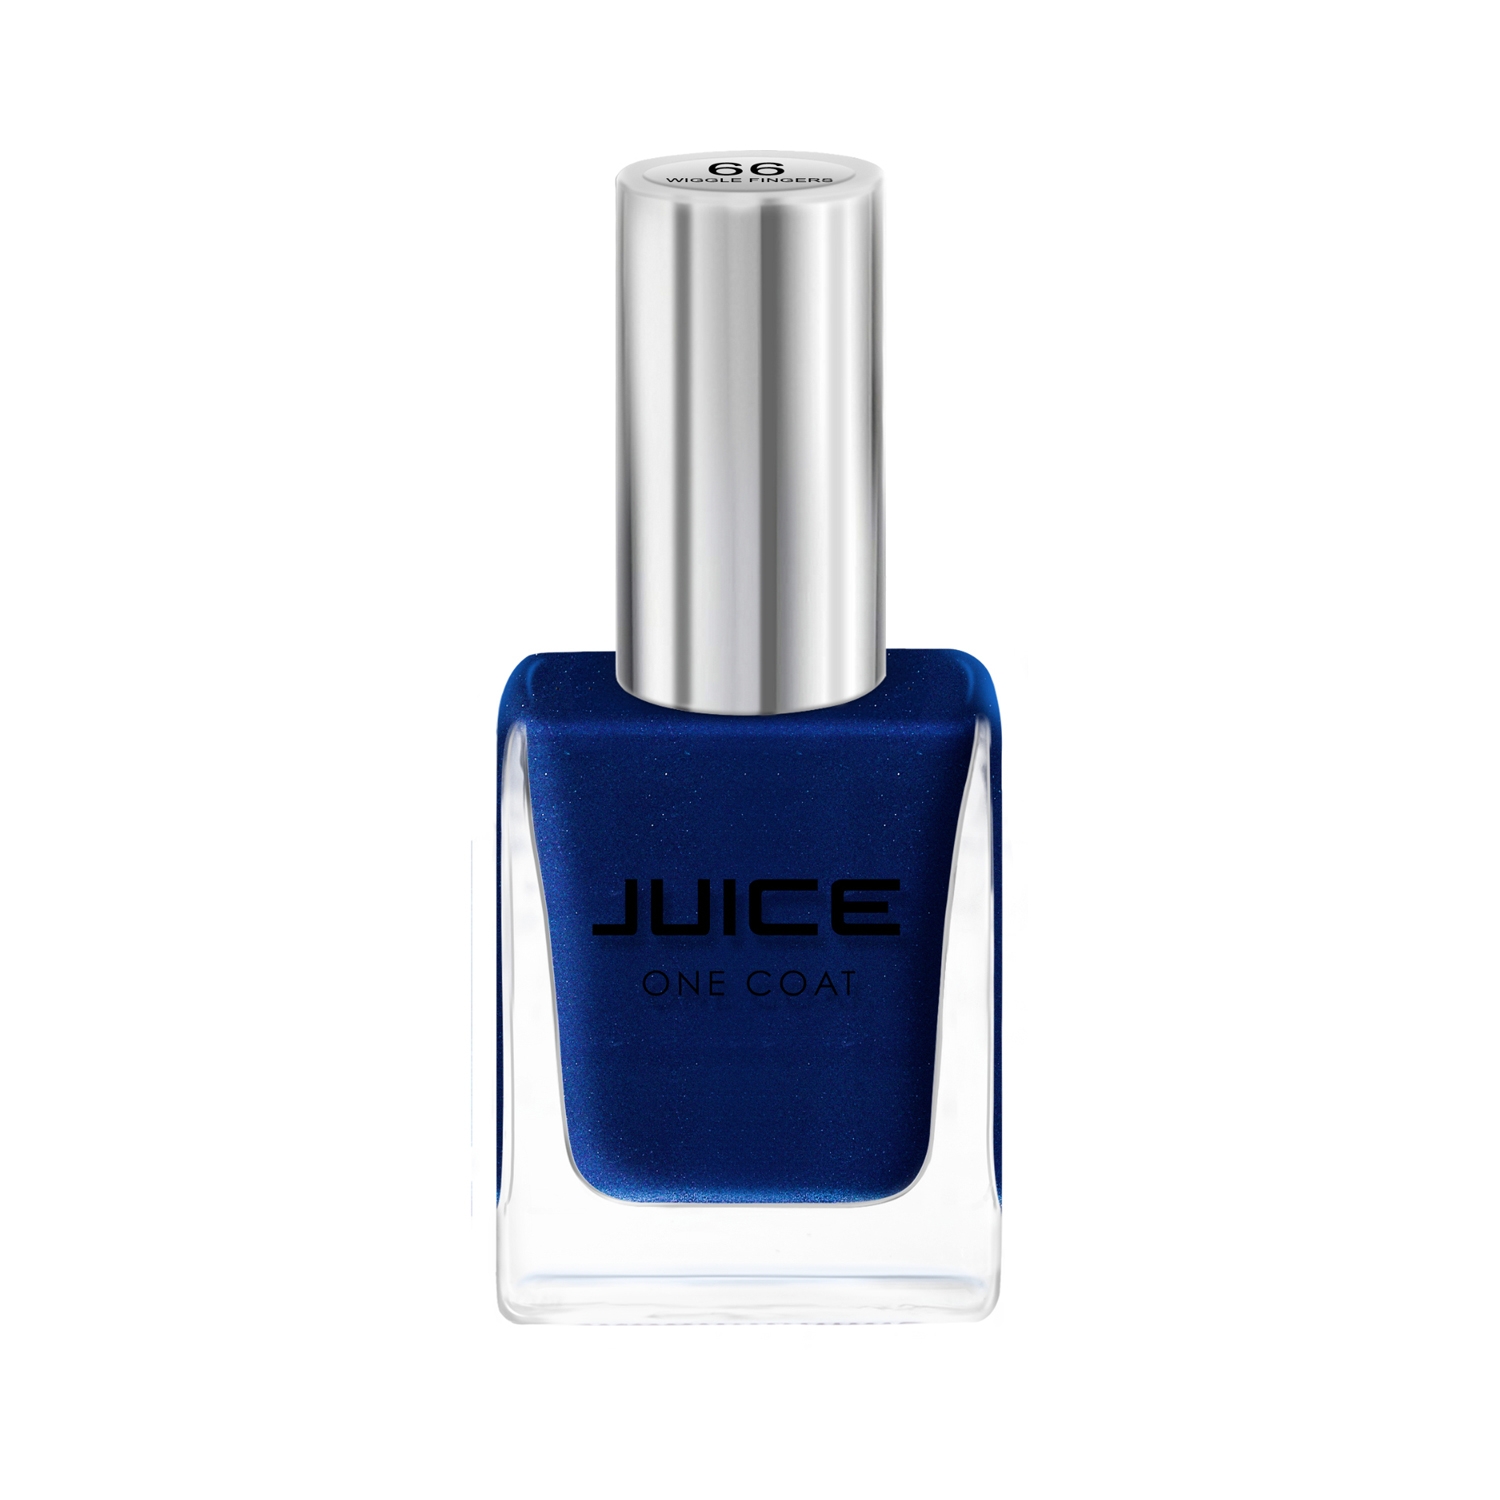 JUICE | Juice One Coat Quick Dry Chip Resistant Nail Polish - 66 Wiggle Fingers (11ml)